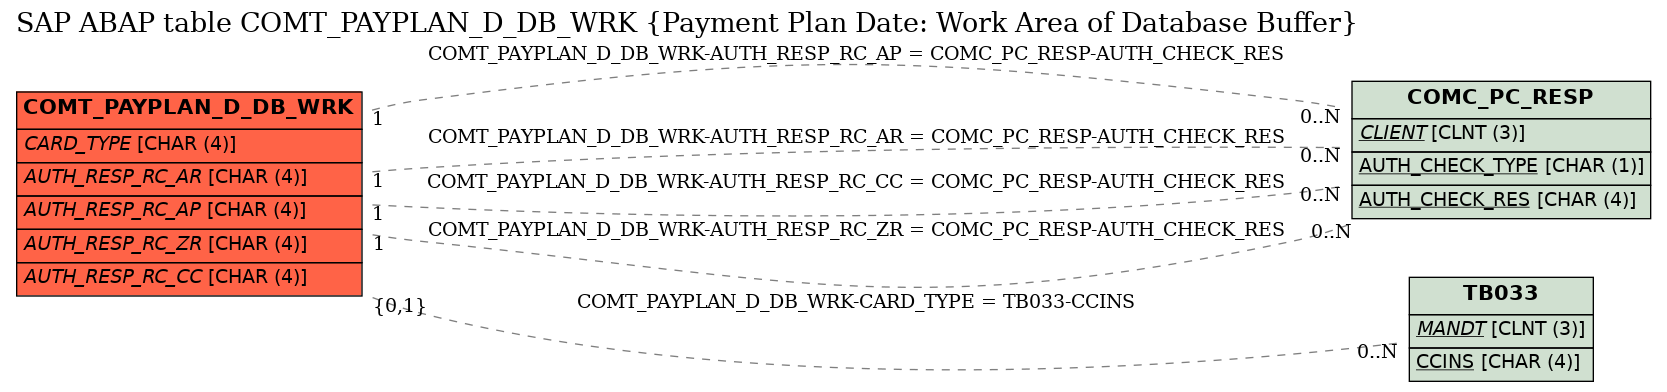 E-R Diagram for table COMT_PAYPLAN_D_DB_WRK (Payment Plan Date: Work Area of Database Buffer)